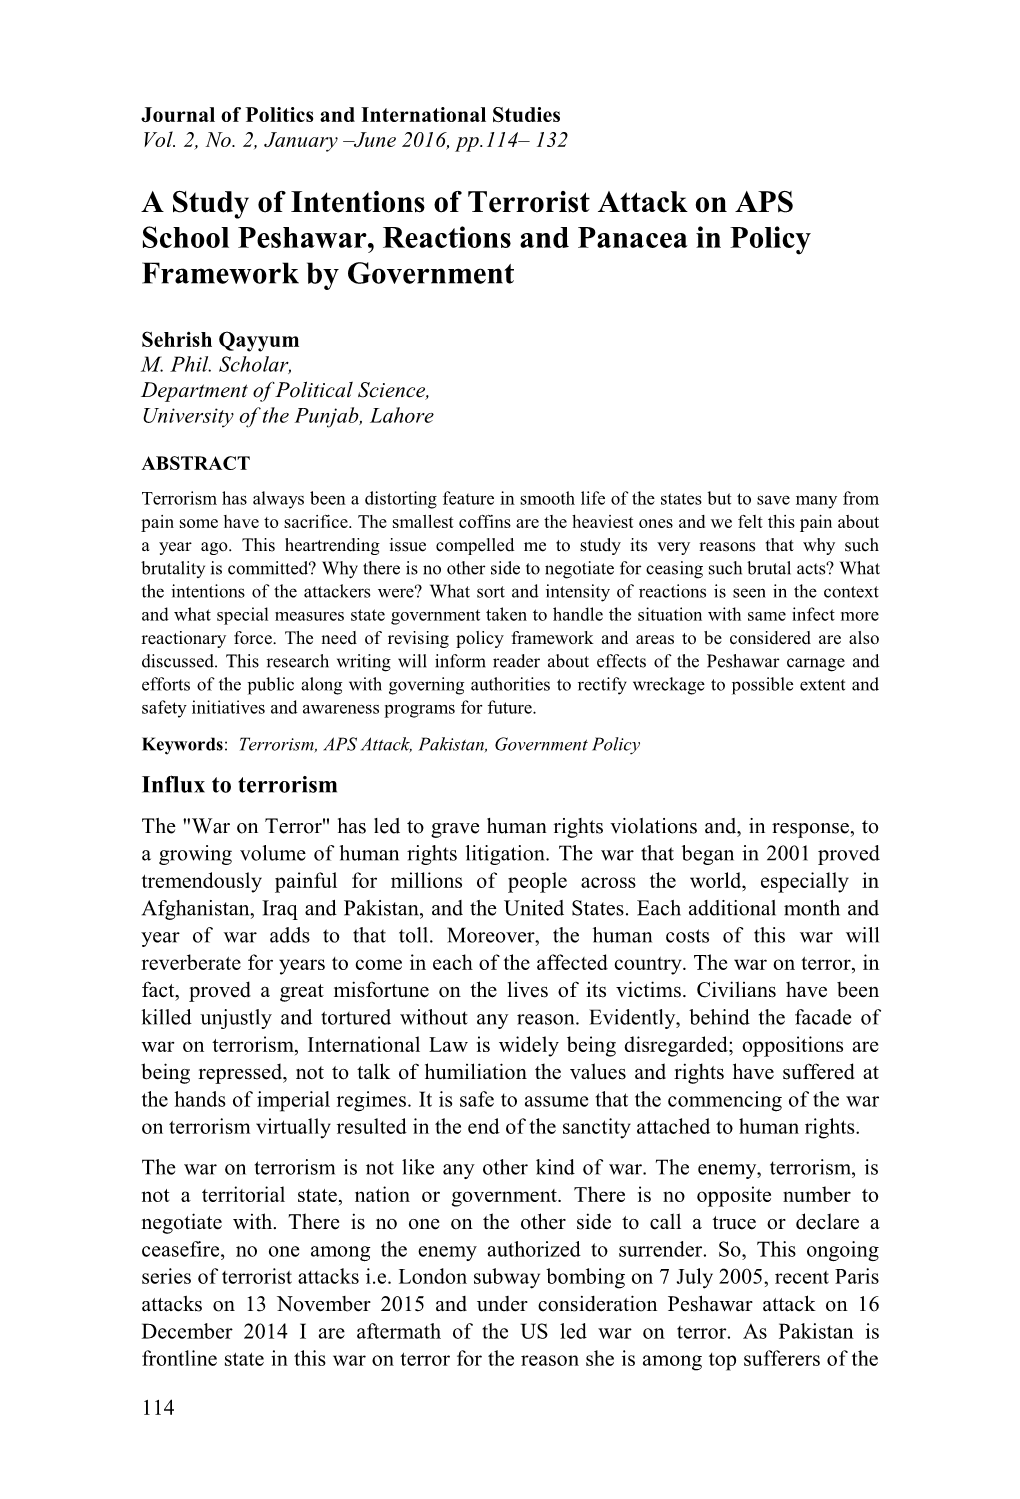 A Study of Intentions of Terrorist Attack on APS School Peshawar, Reactions and Panacea in Policy Framework by Government